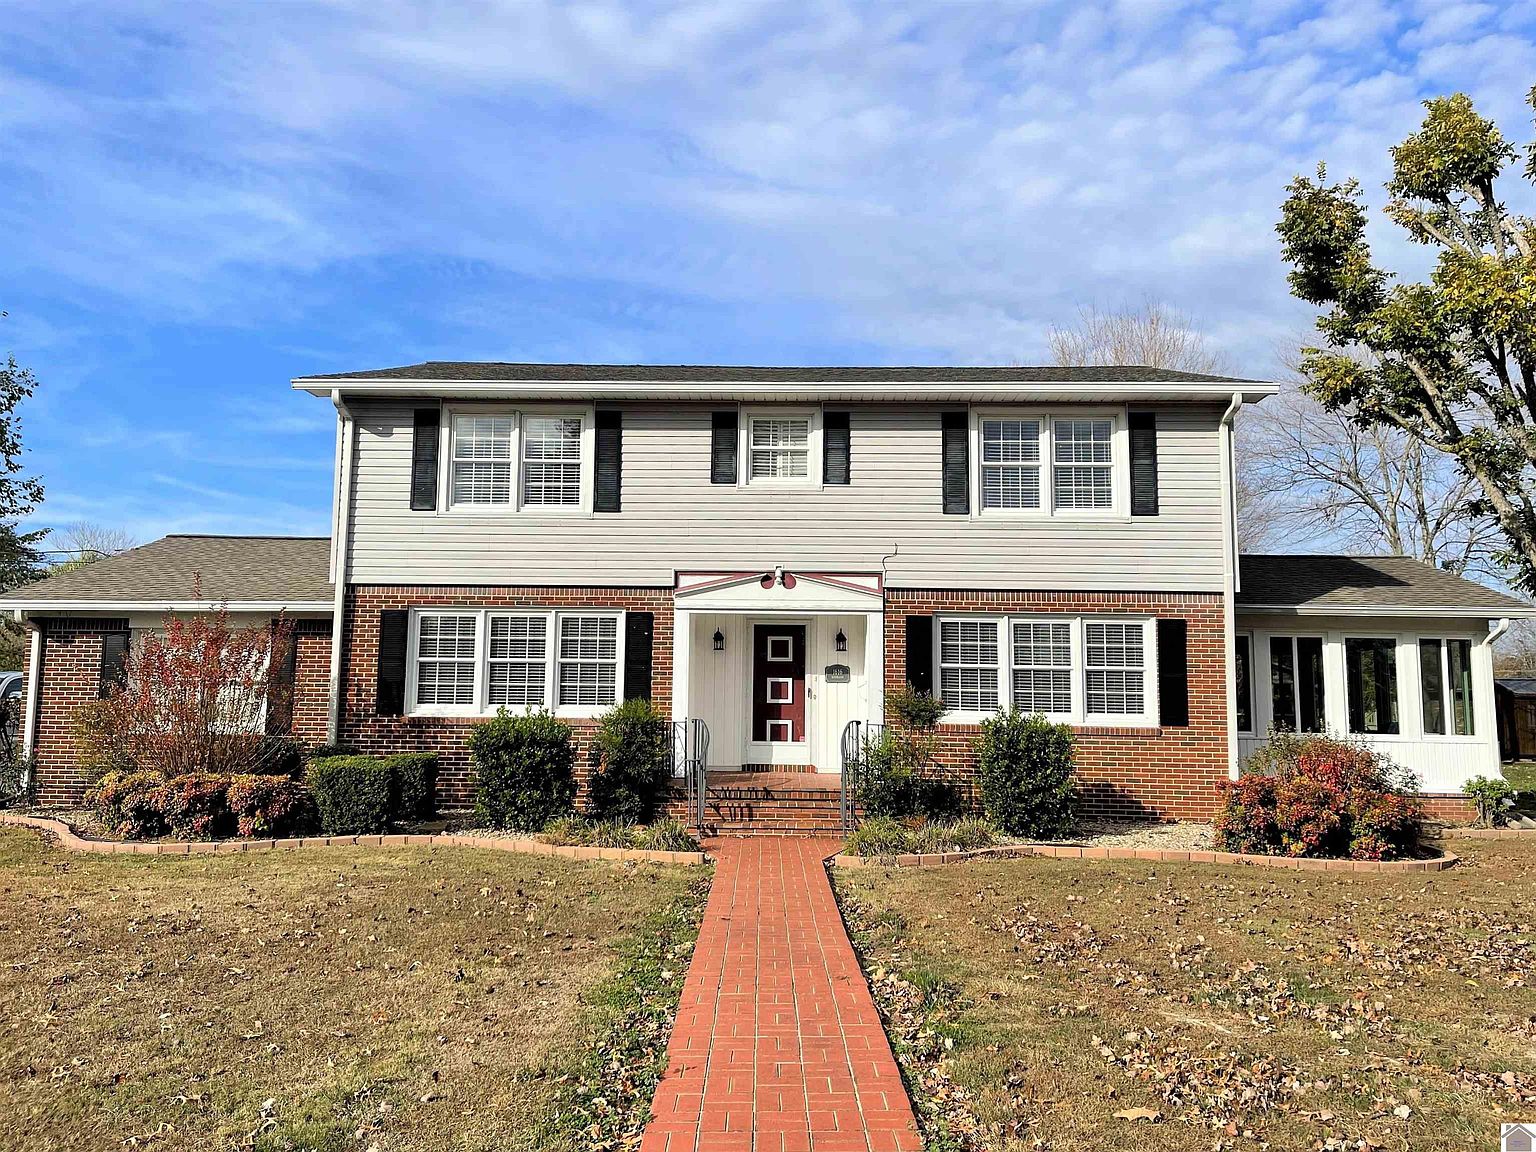 1616 Keenland Dr, Murray, KY 42071 | Zillow